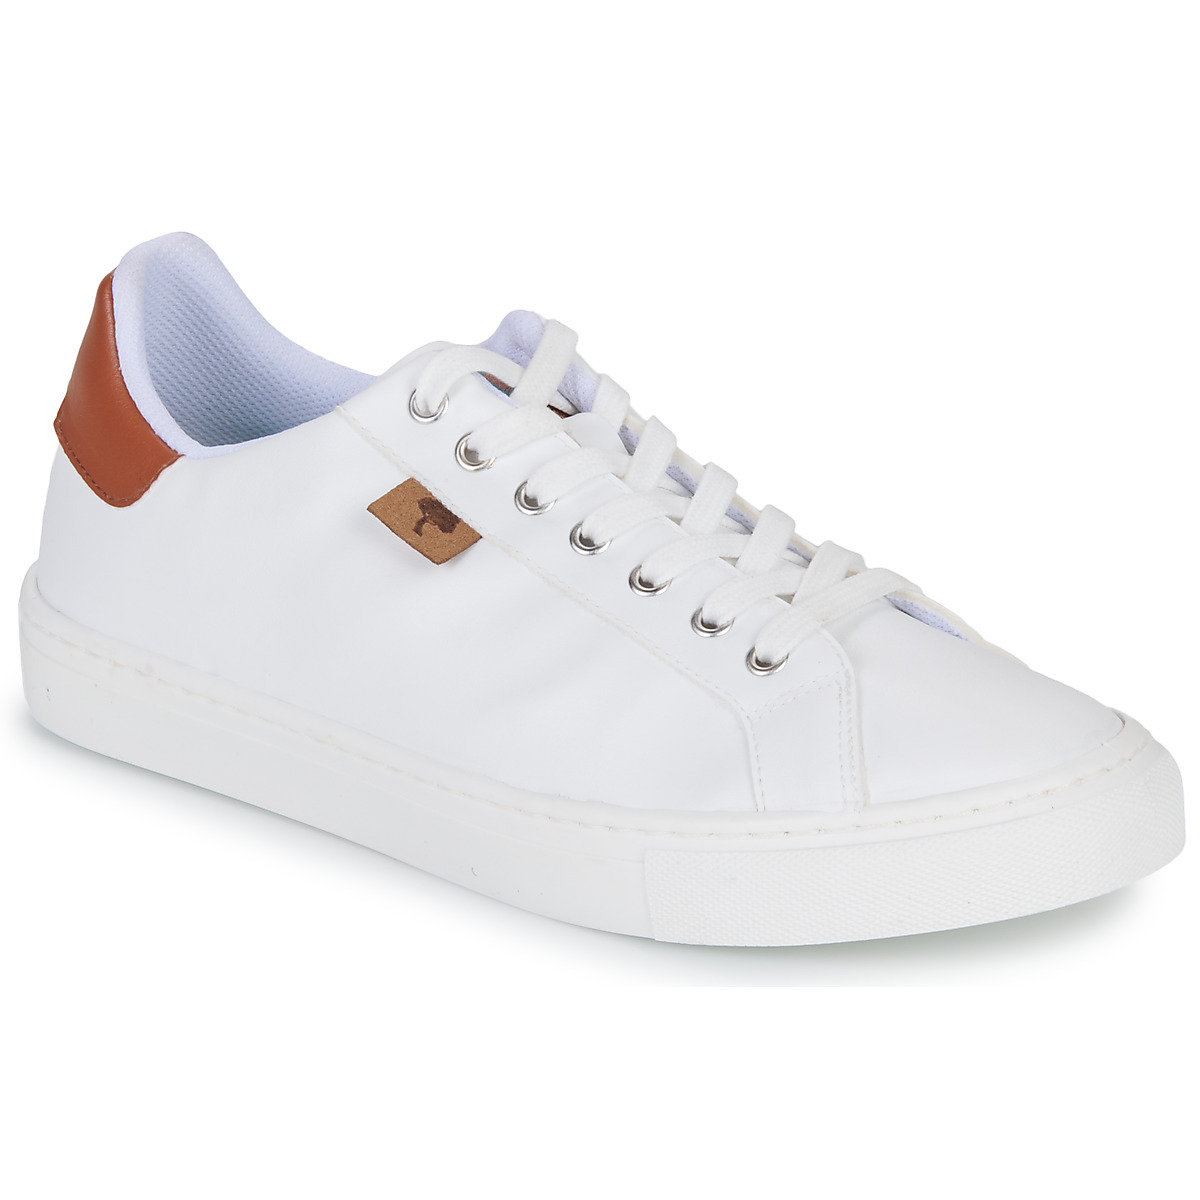 Dream In Green - Mens White Sneakers at Spartoo GOOFASH